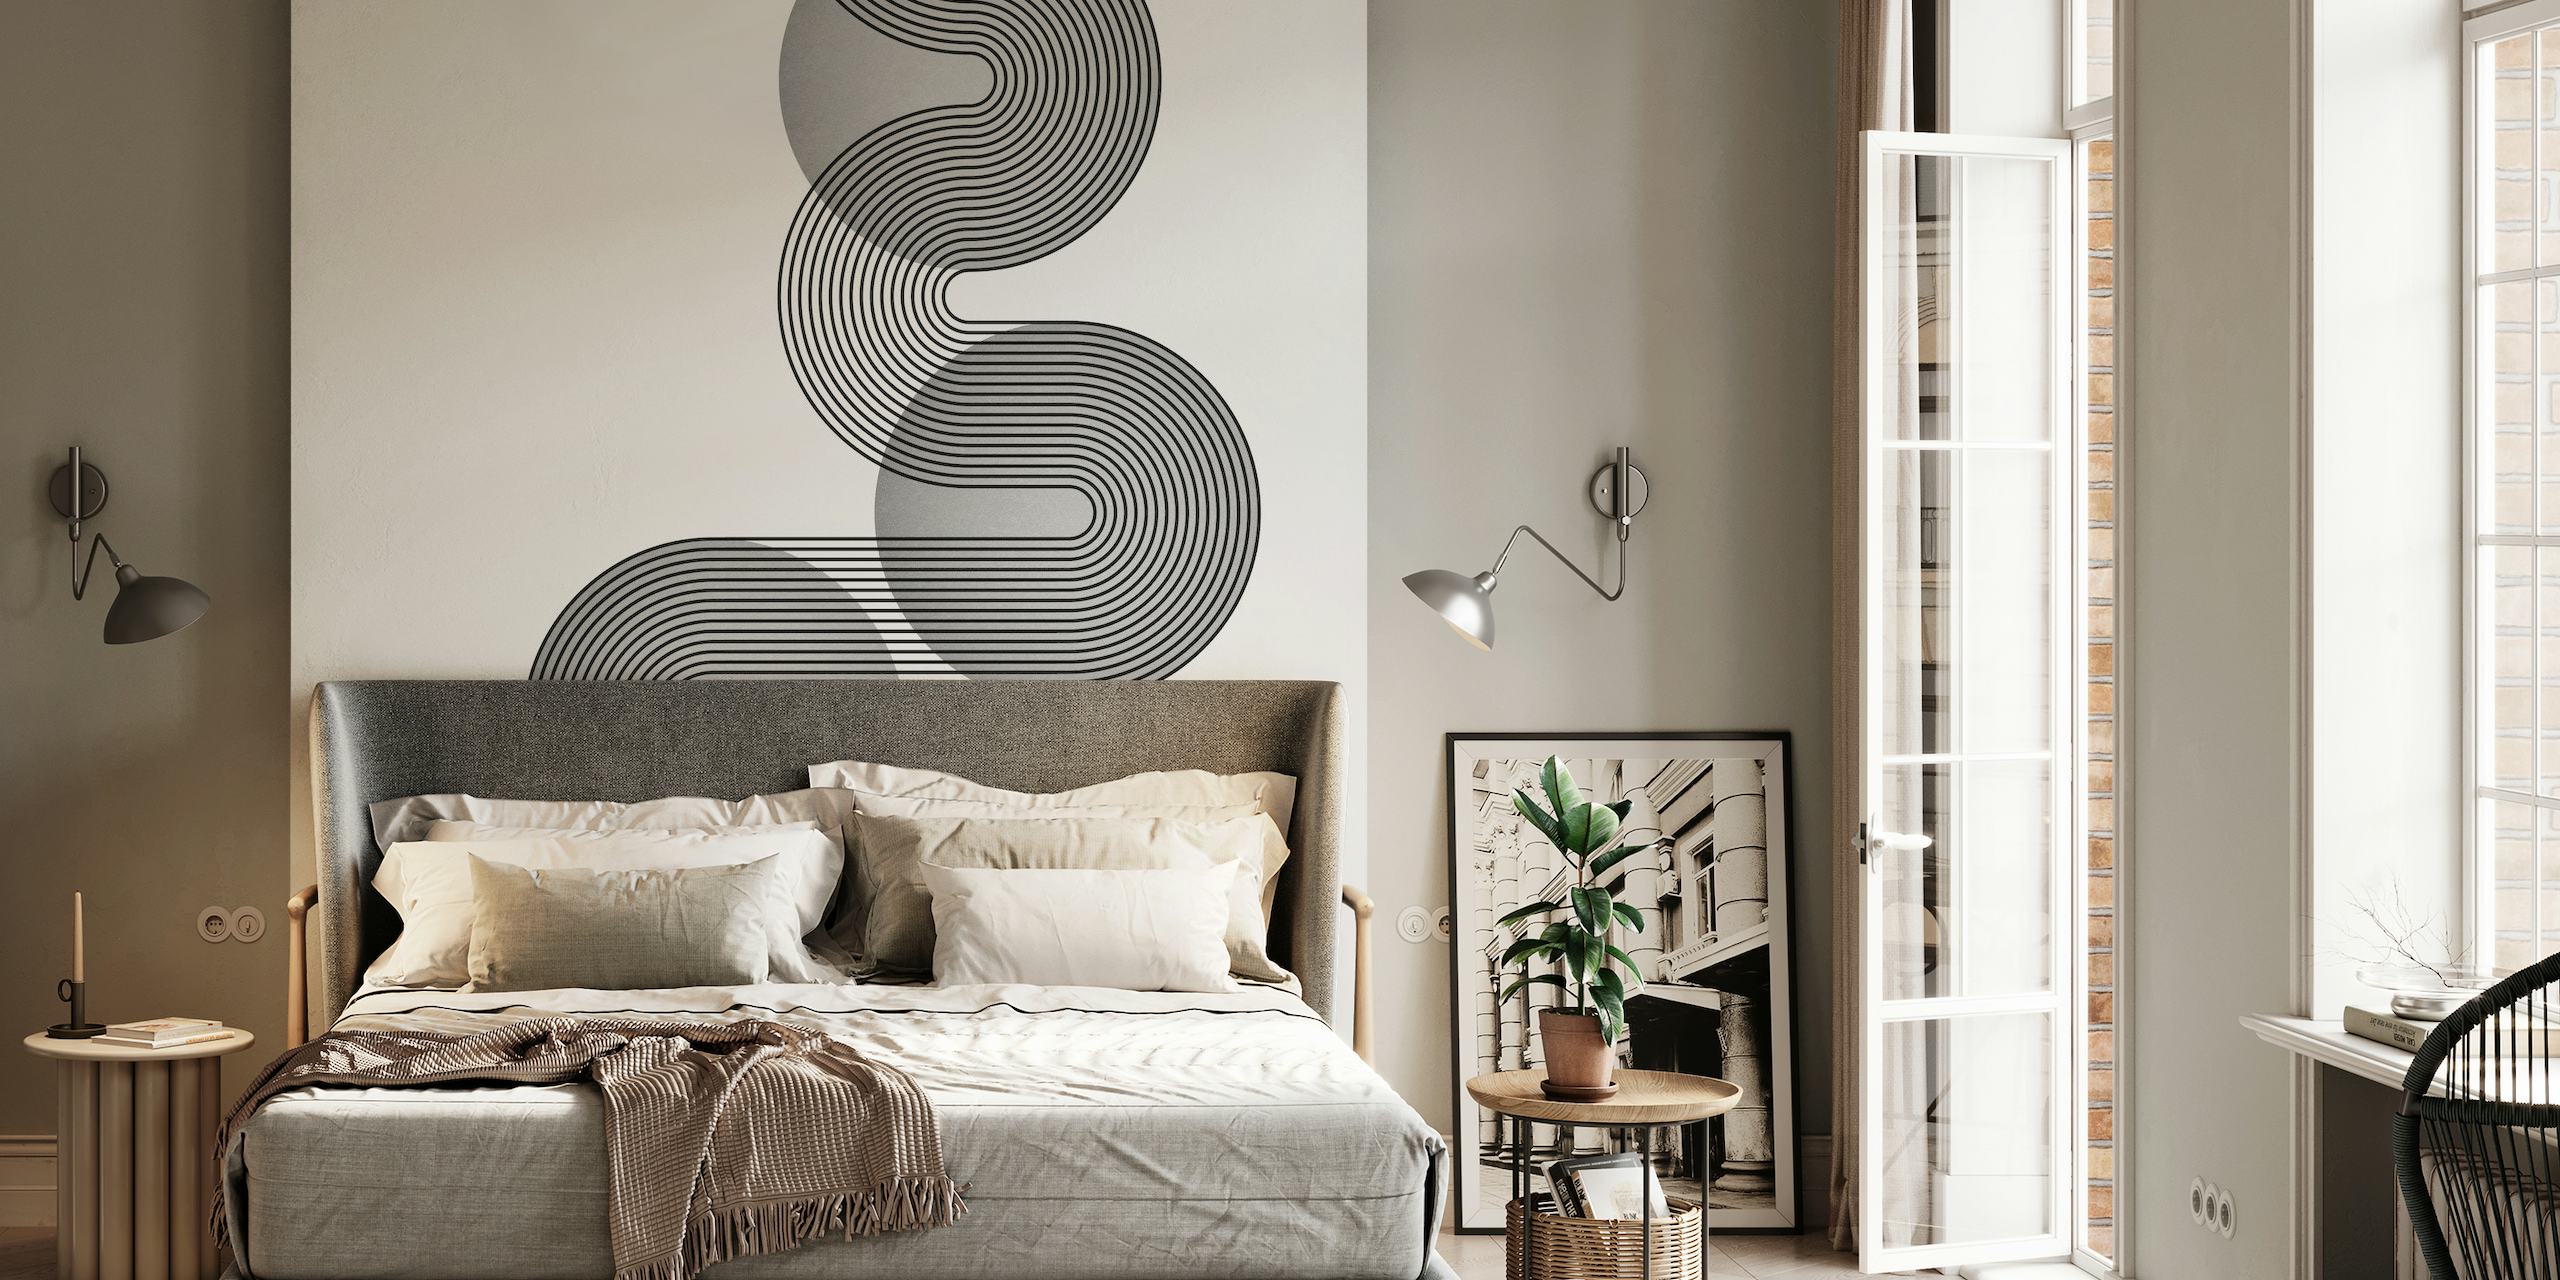 Monochrome Bauhaus-inspired wall mural with intertwined geometric shapes in platinum hues